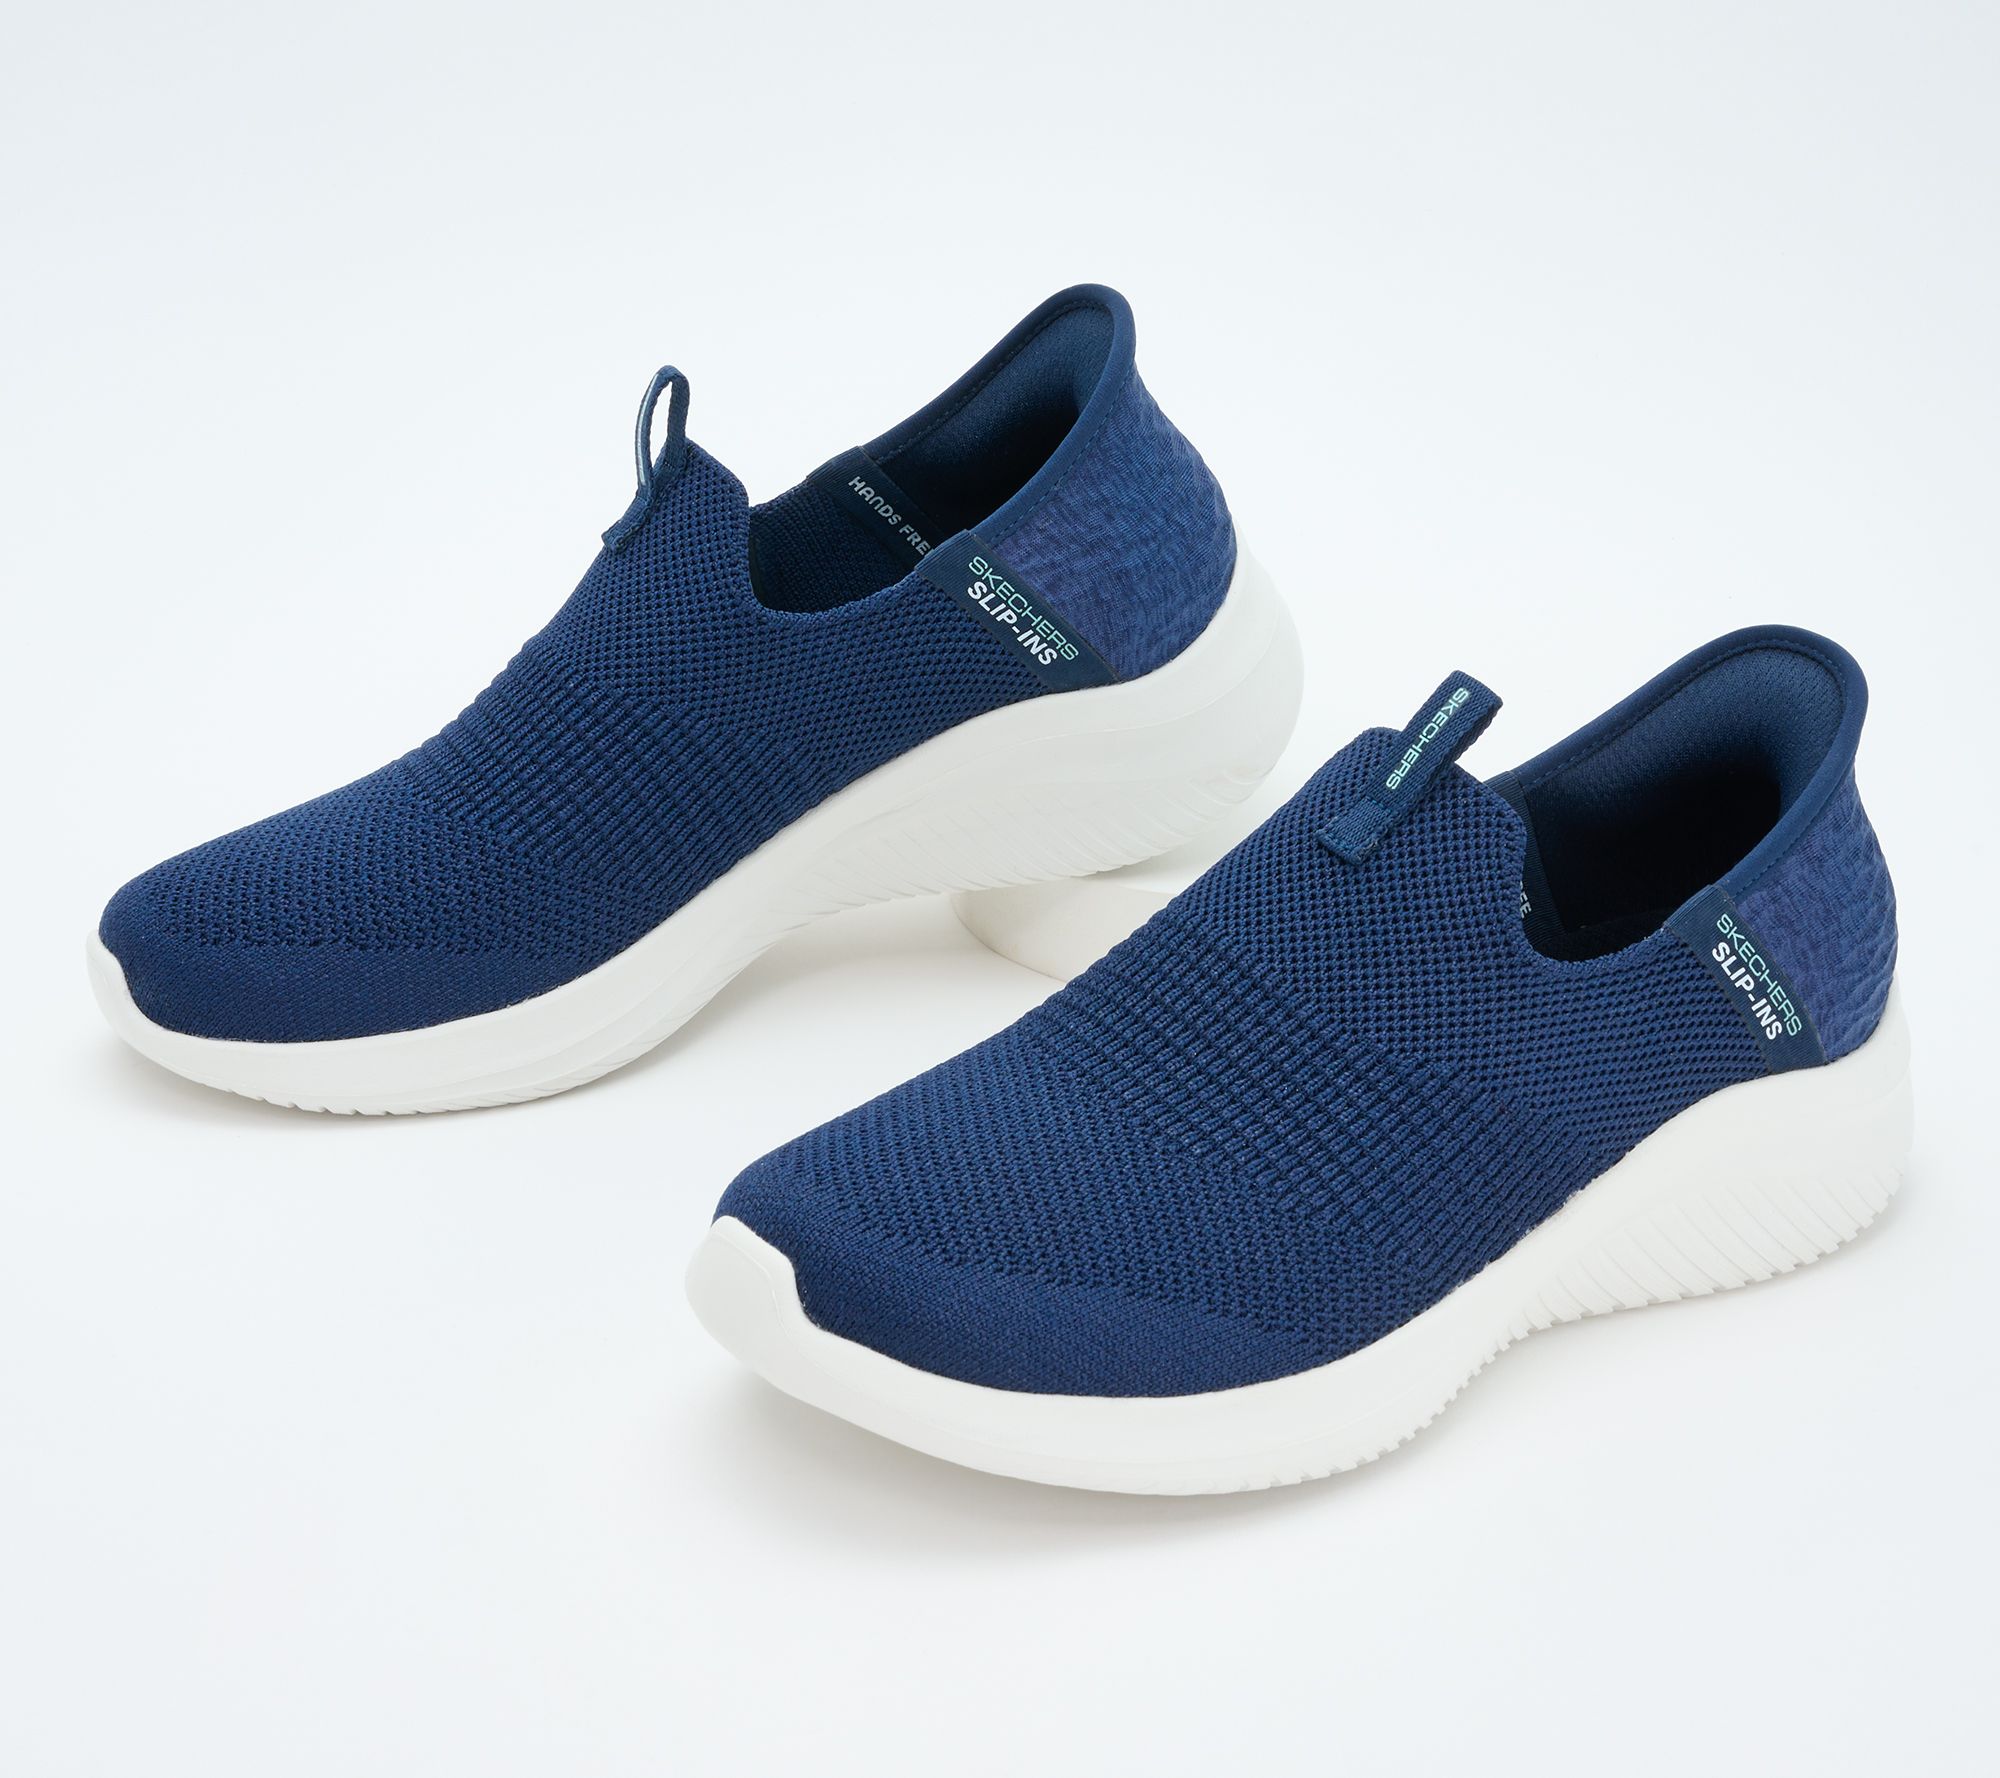 Skechers Slip-ins Ultra Washable Knit Shoes - Smooth - QVC.com